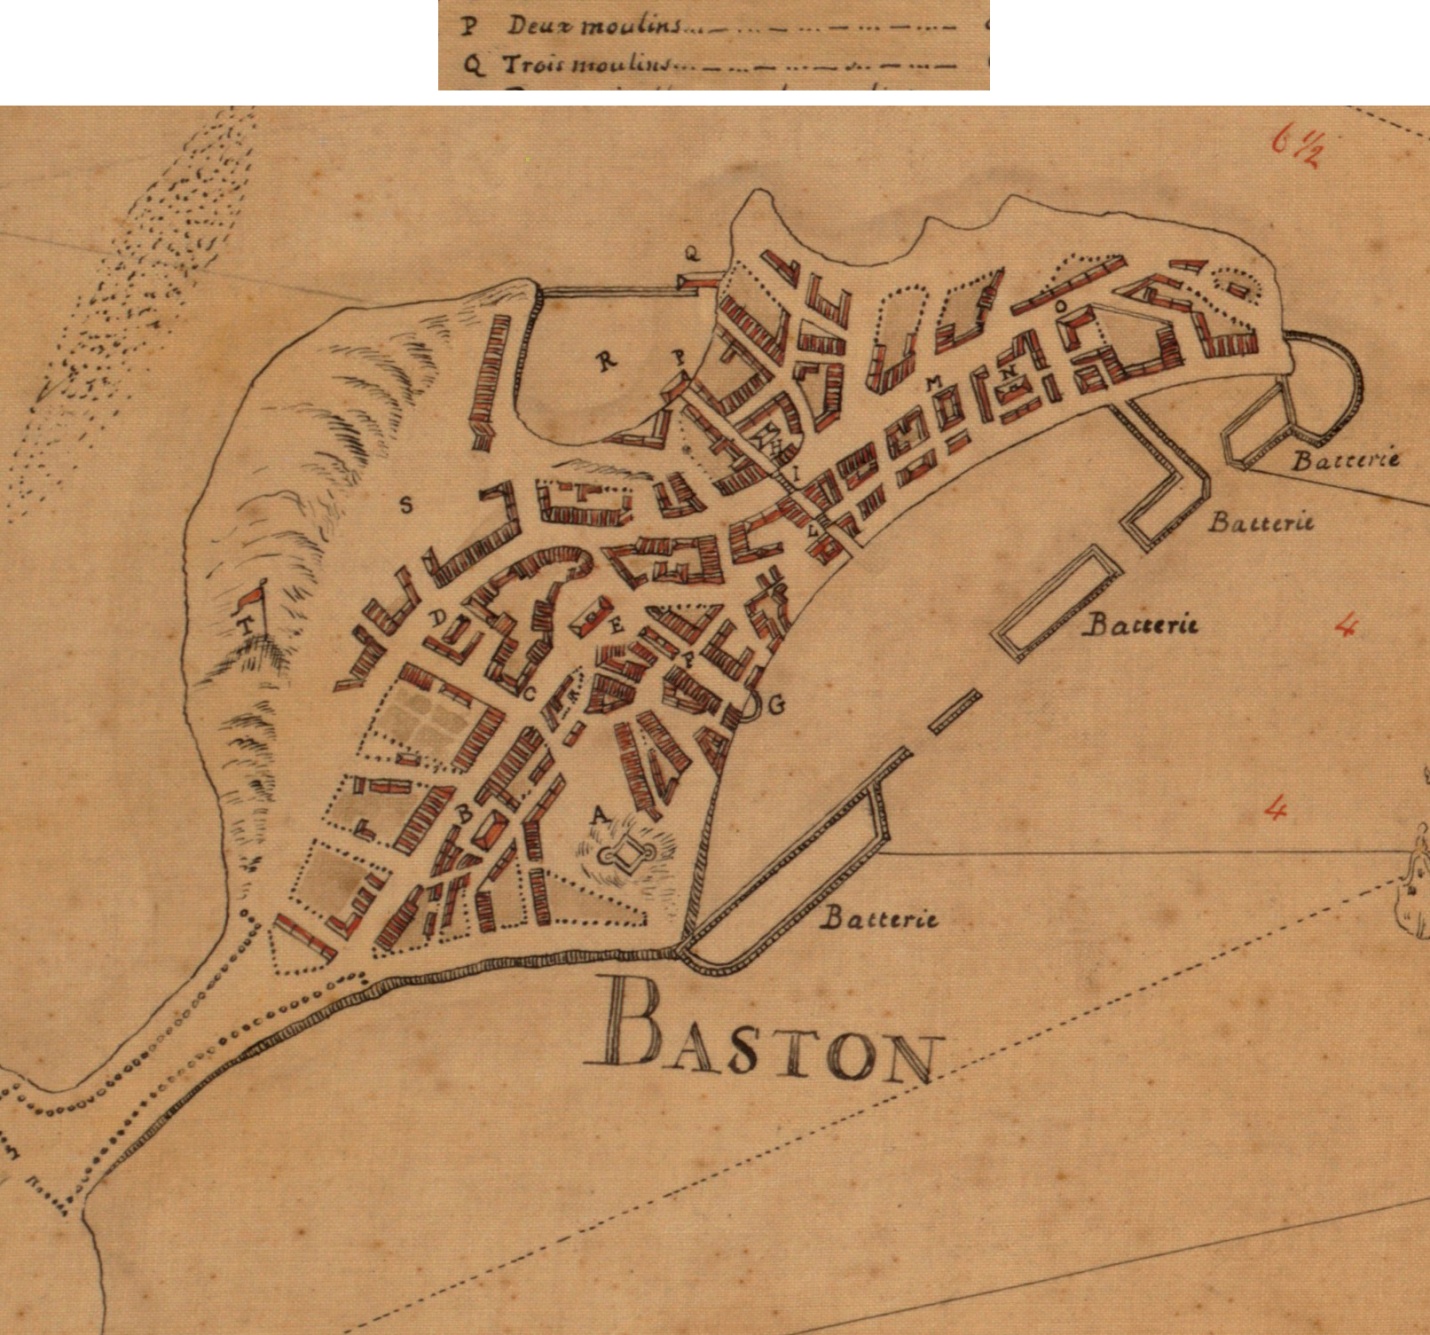 Boston 1693 - Franquelin, Jean Baptiste Louis. Carte de la Ville, Baye, et Environs de Baston. (1879) "Traced from the original in the Dépôt des Cartes de la Marine at Paris & presented to the Boston Public Library by Alfred Greenough, Architect, June 1879." Original version : 1693.- from the Leventhal Map & Education Center, Boston Public Library. Locations P & Q in the map are shown in the legend to have had multiple mills.